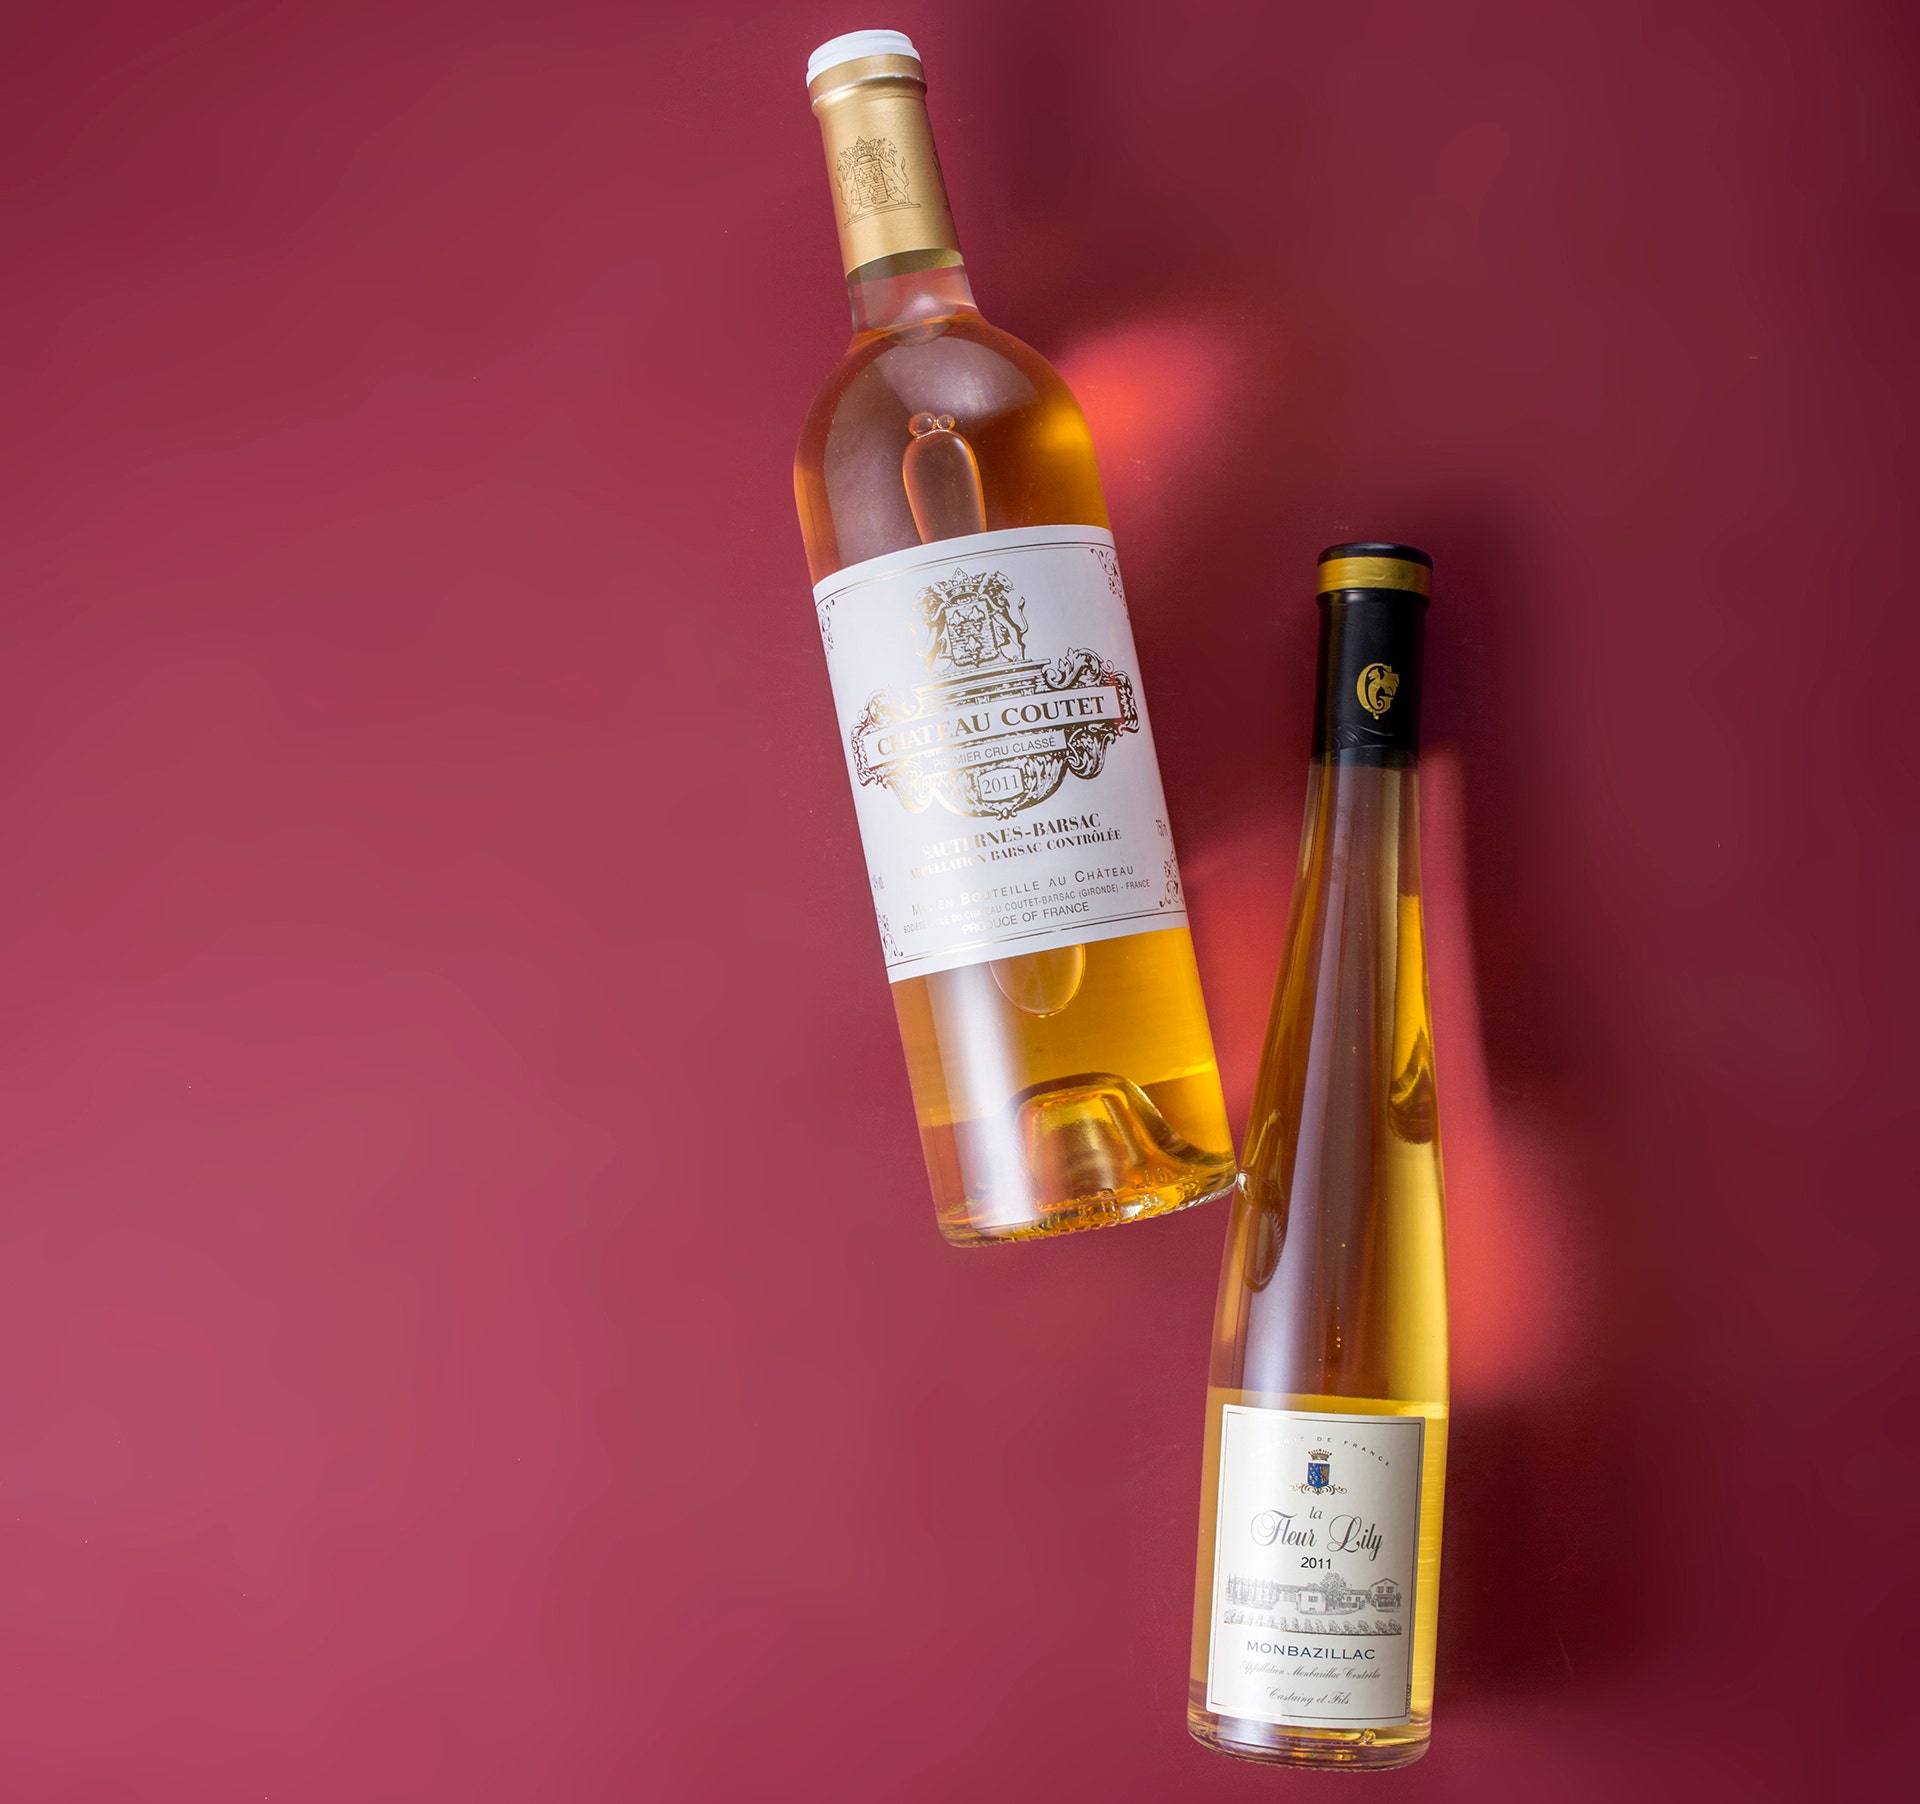 Sauternes and Monbazillac Botrytized Wines from France